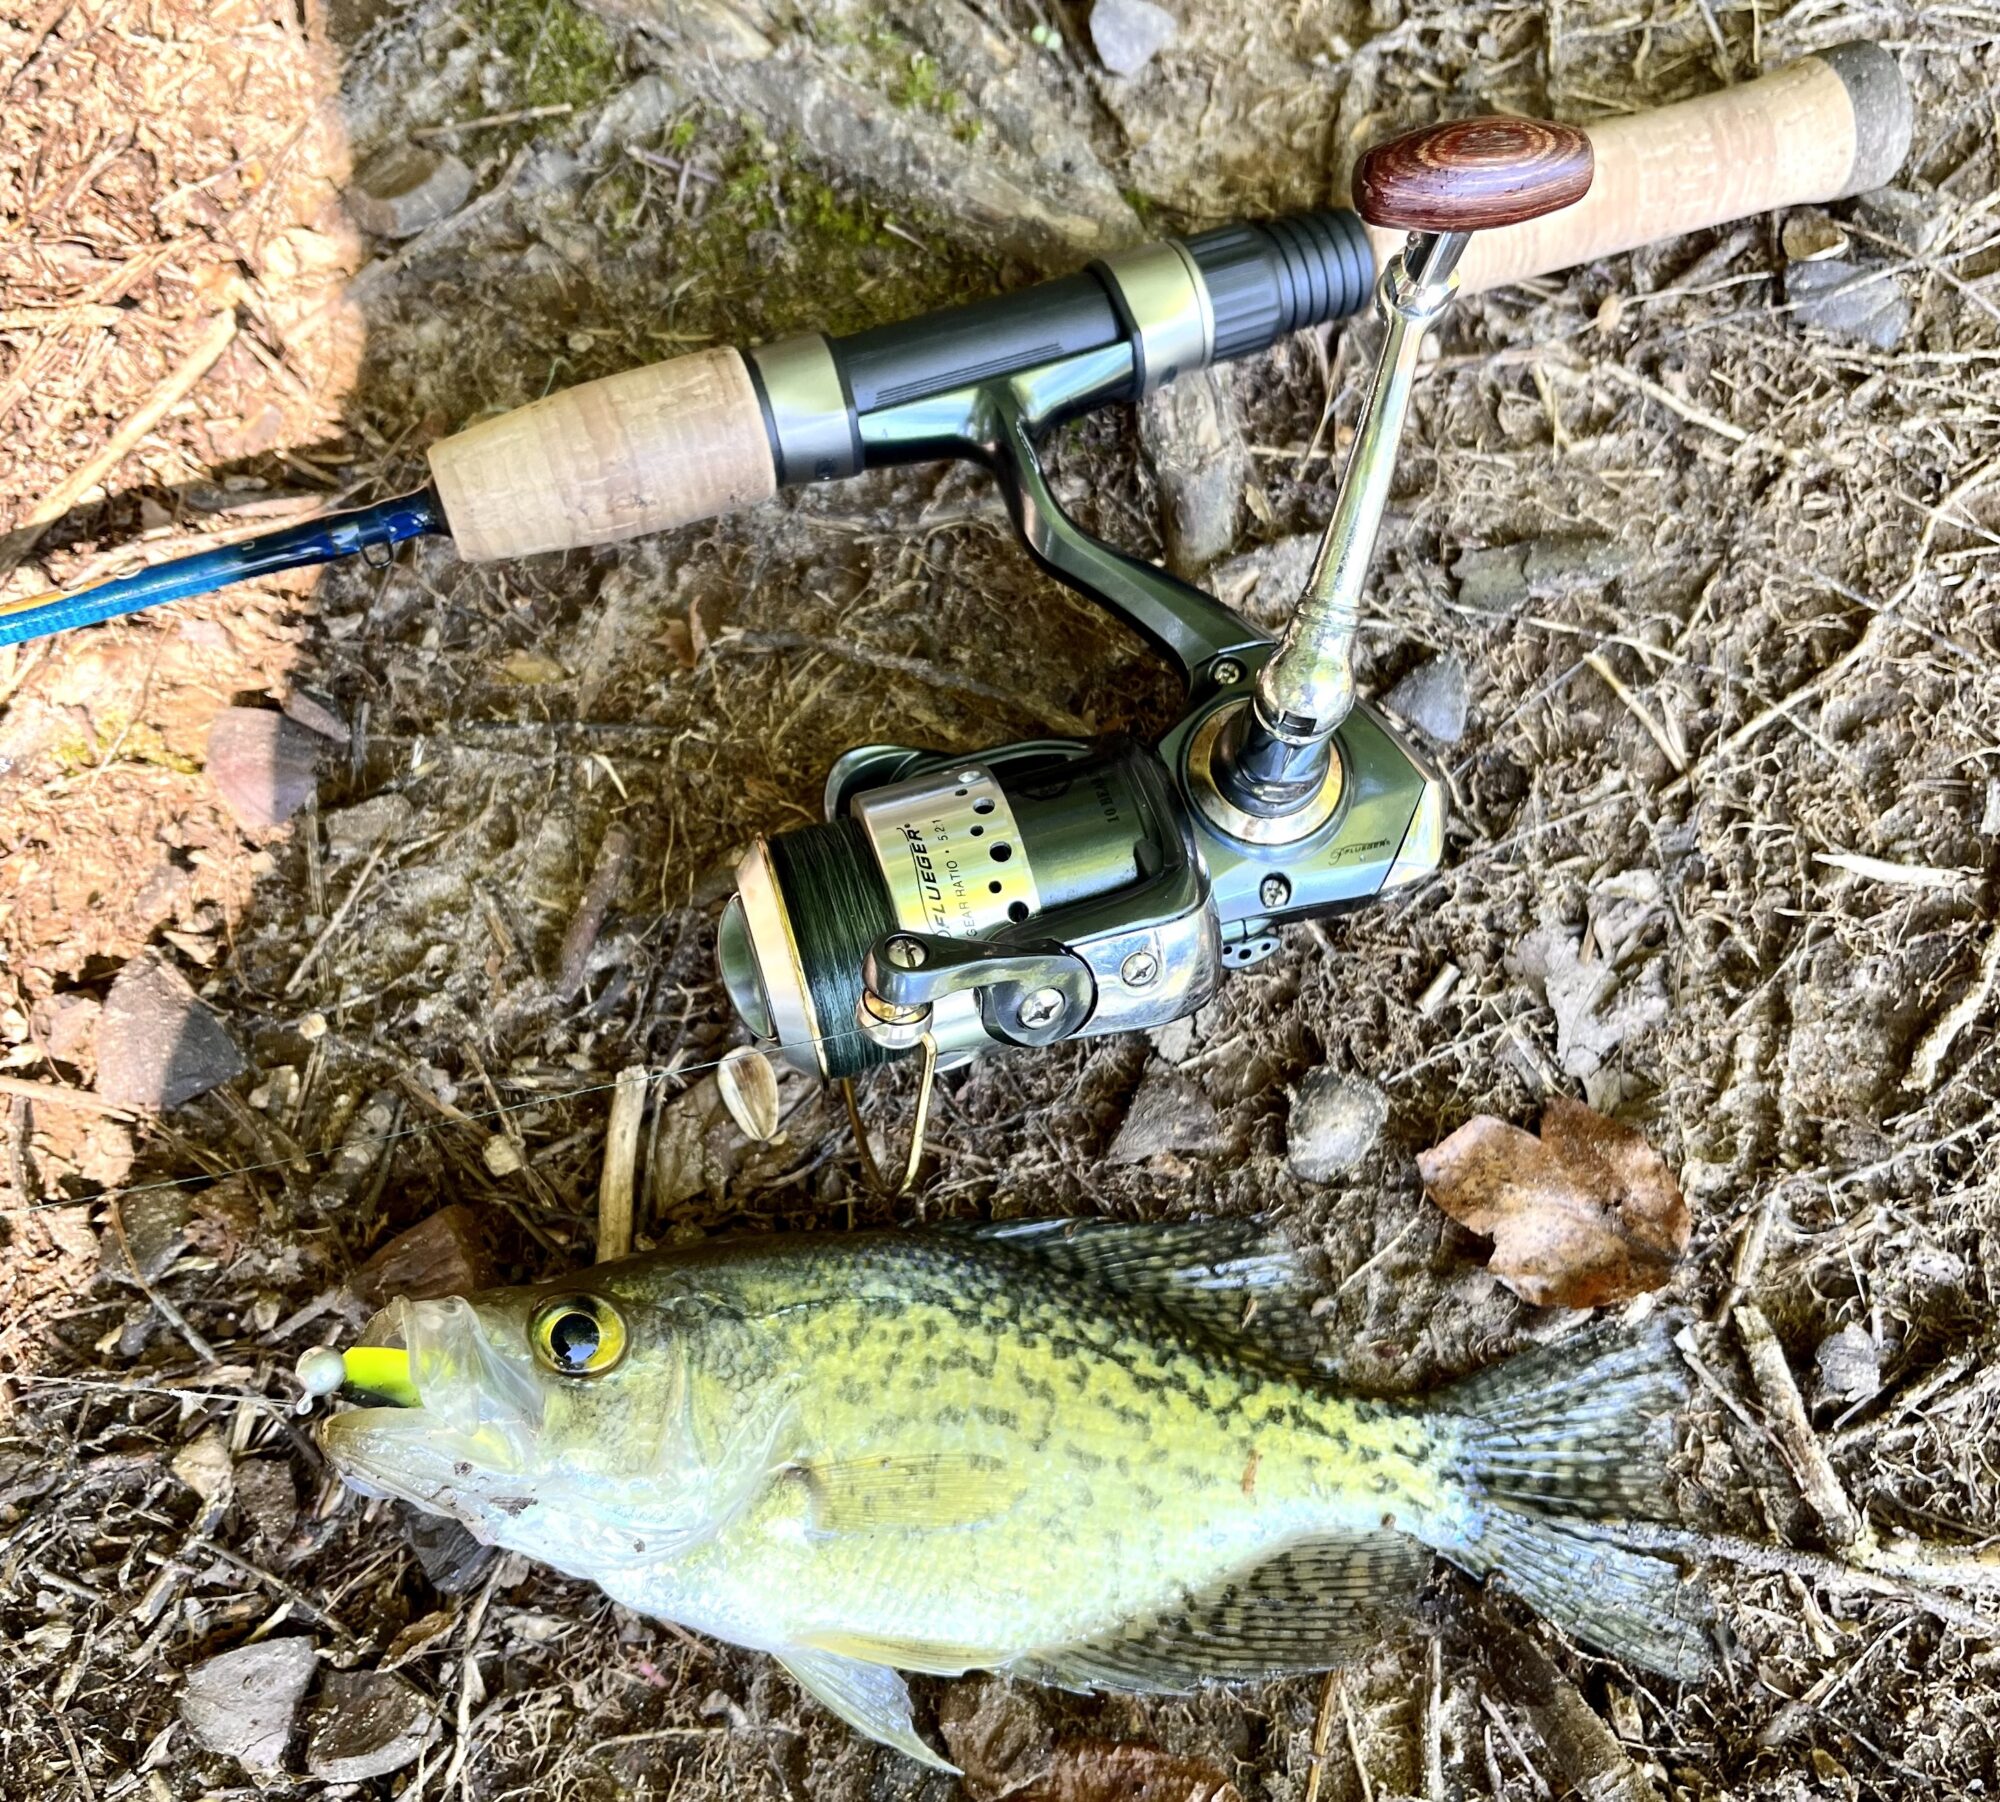 St. Croix Rods - What's your go to setup for panfish? (